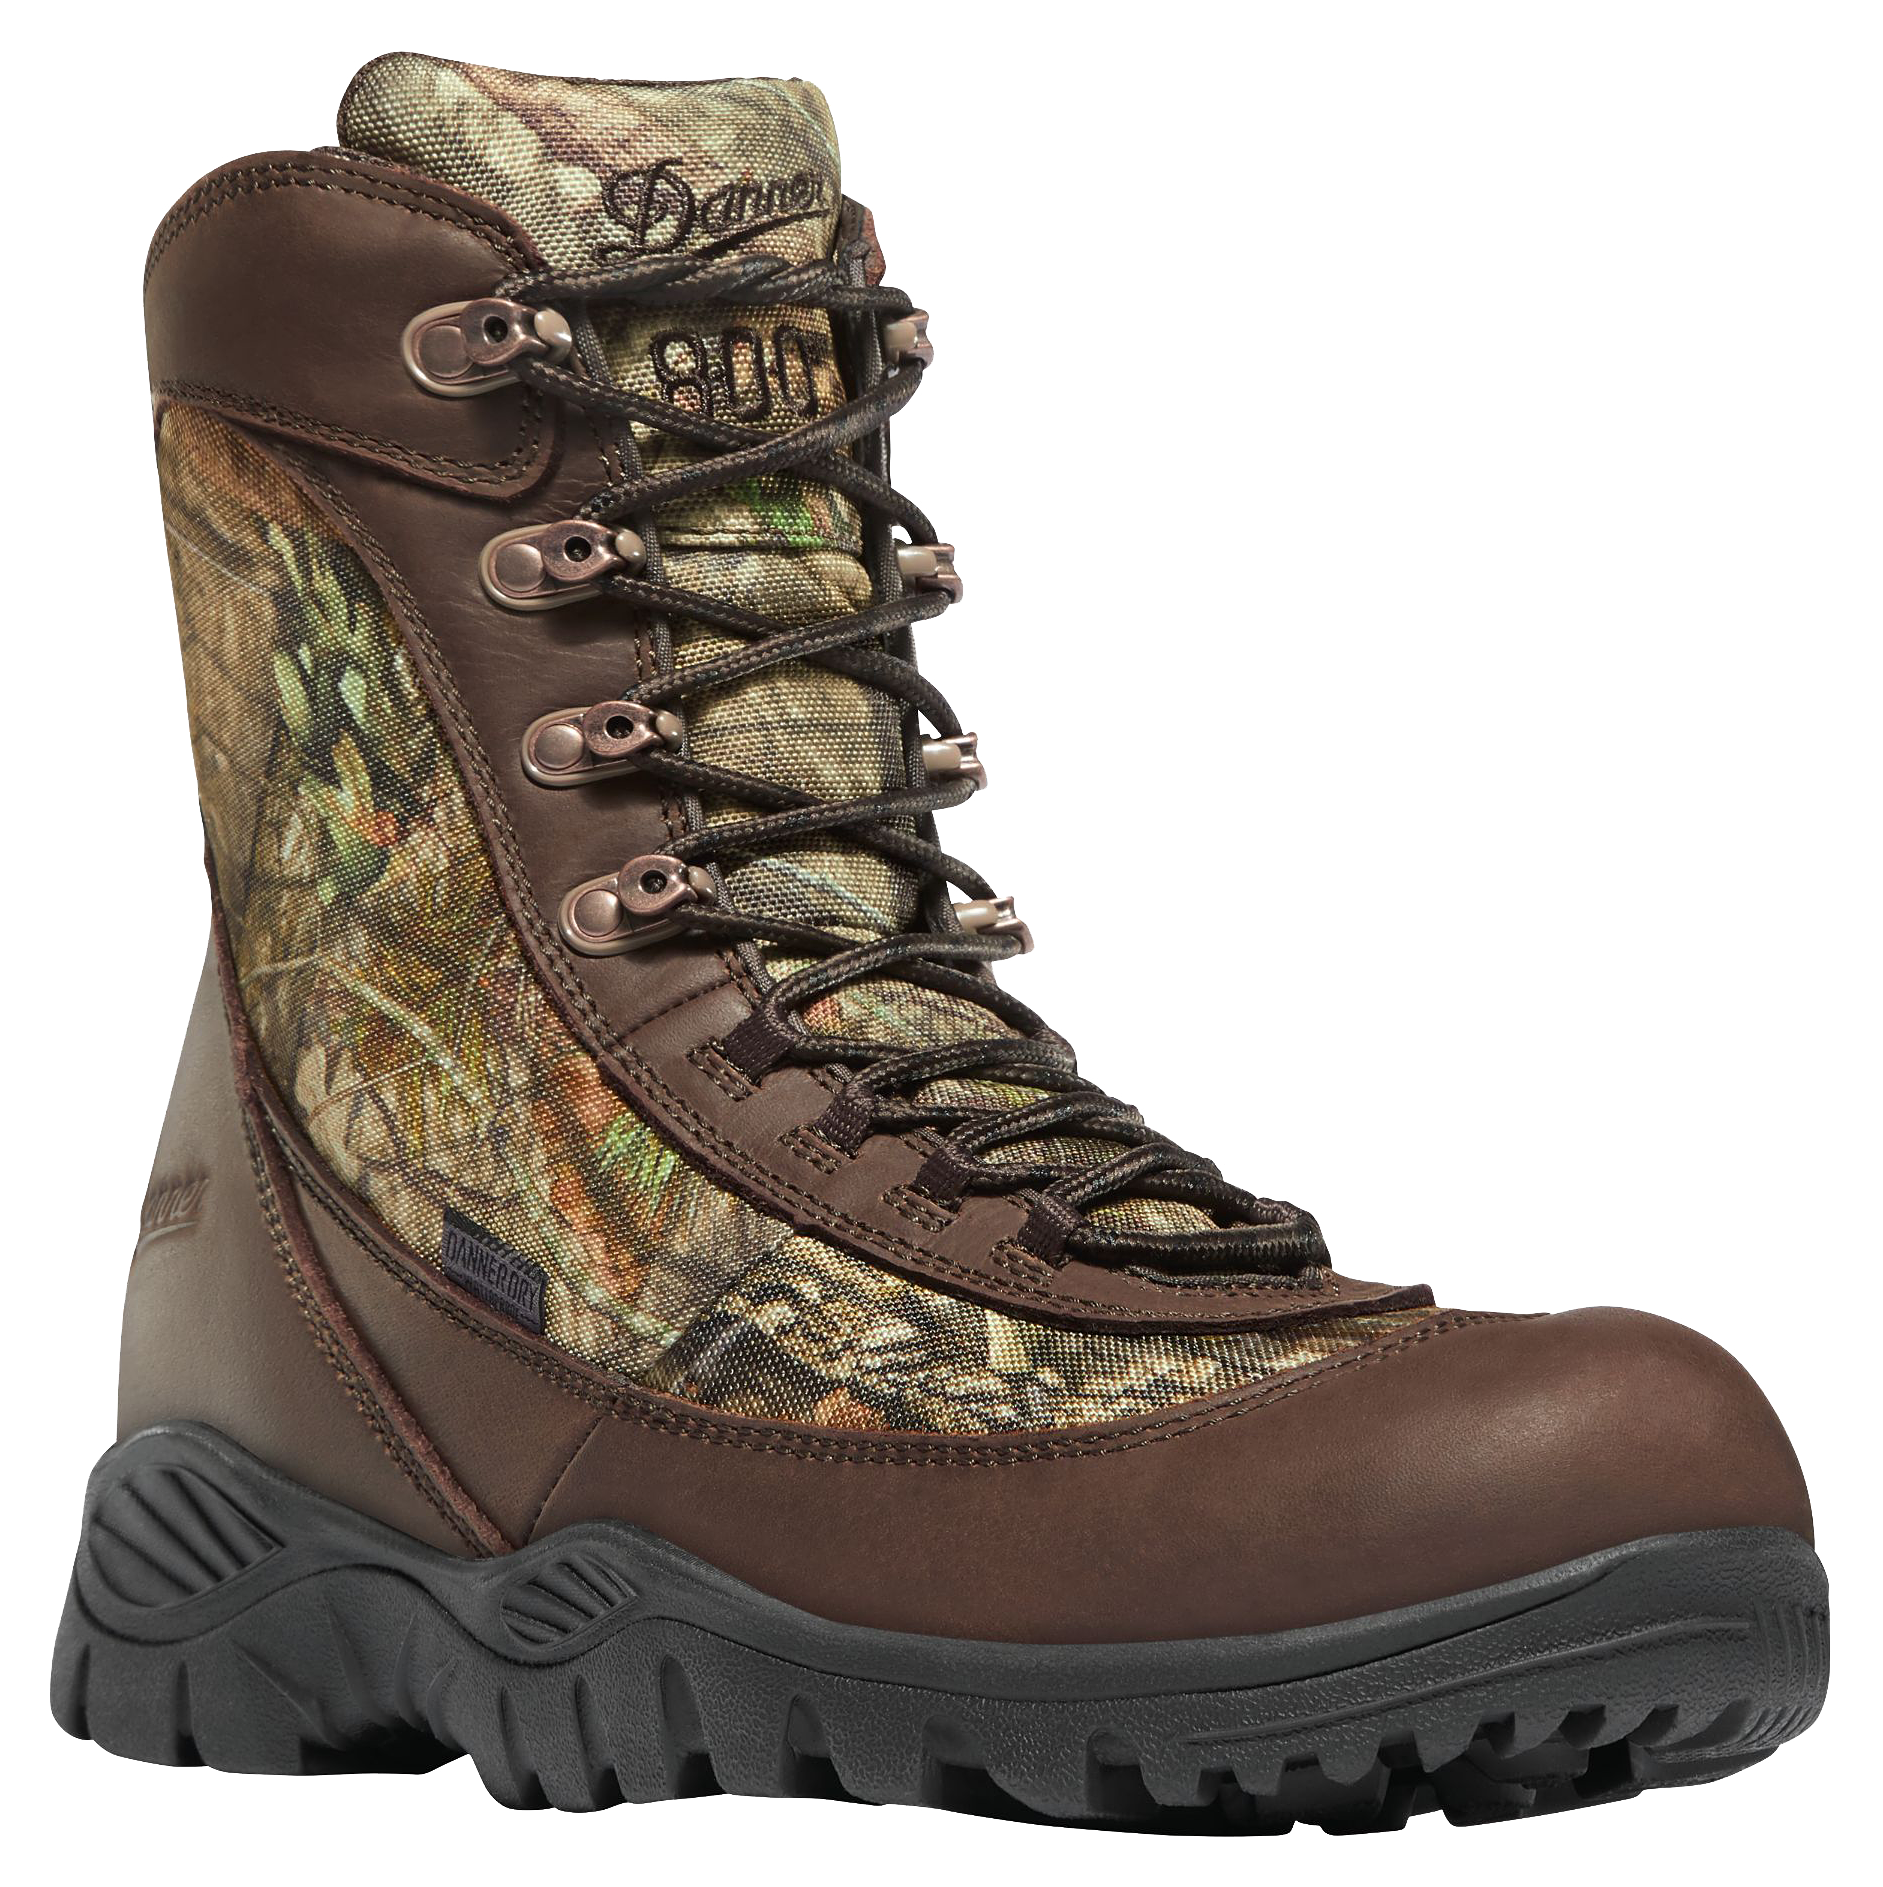 Danner Element 8"" 800-Gram Insulated Waterproof Hunting Boots for Men